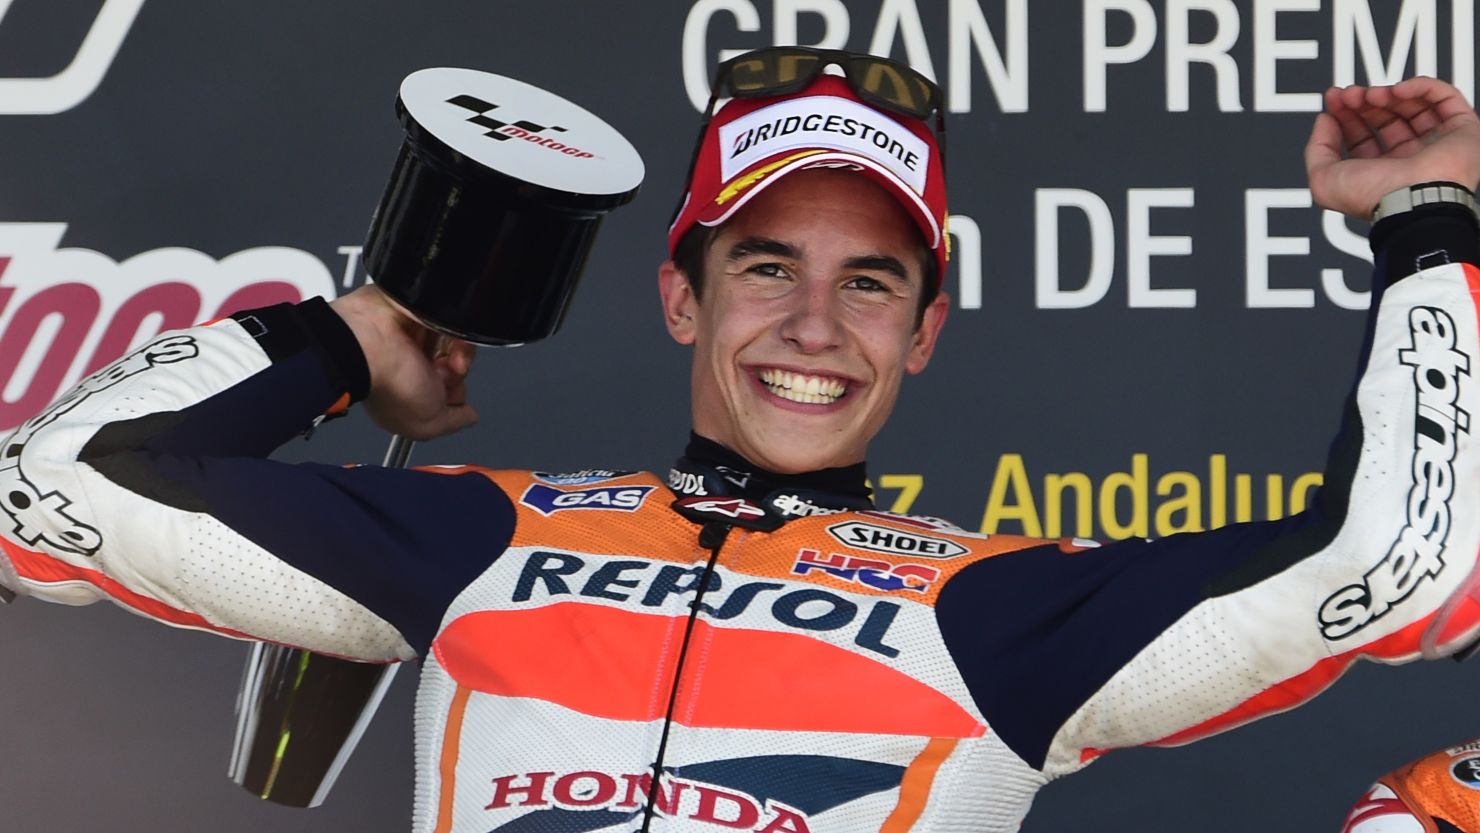 No stopping Marc Marquez as he celebrates his fourth straight MotoGP win since the start of the 2014 season.